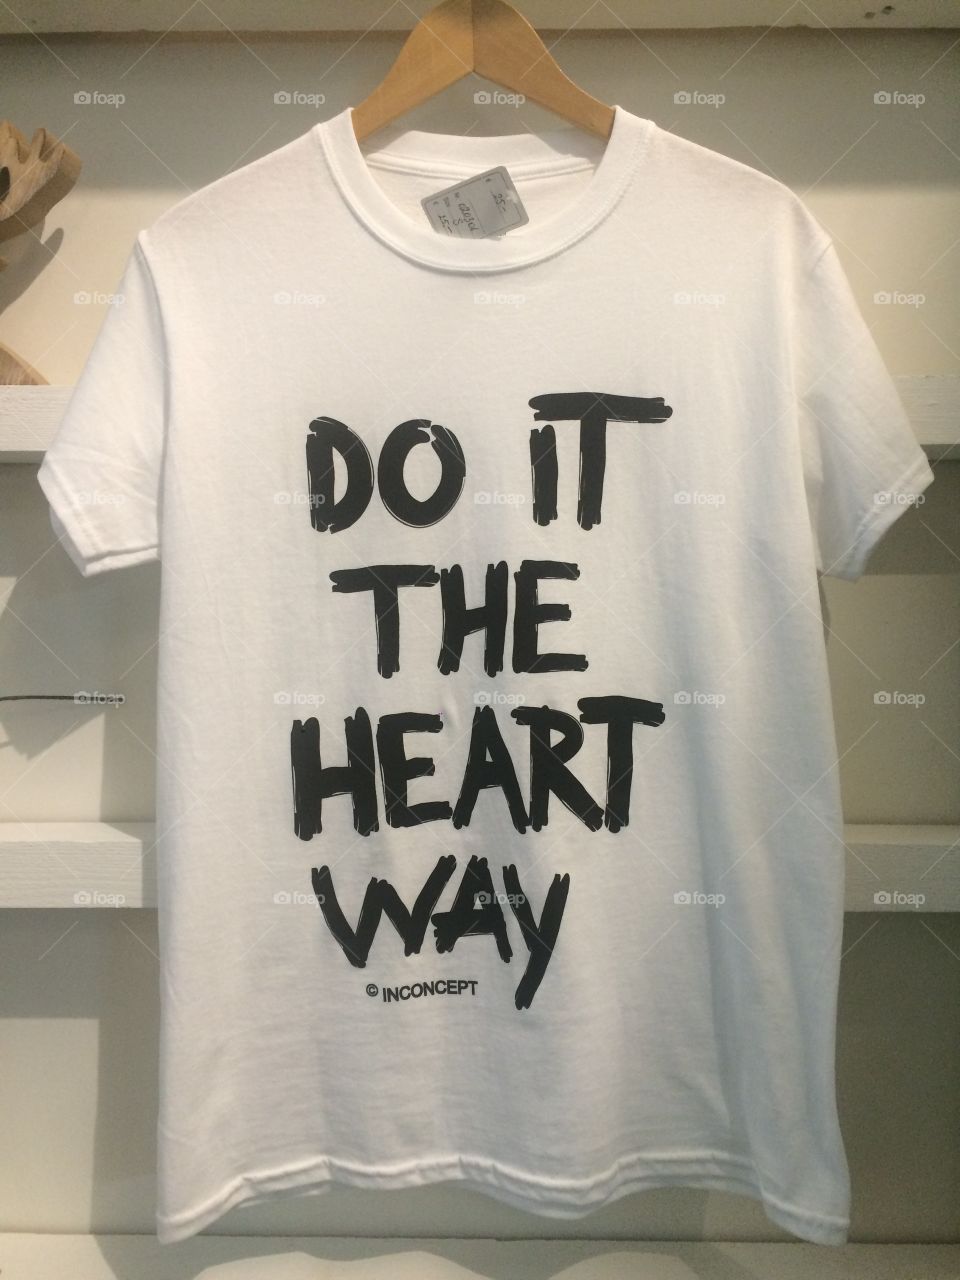 Yes! Wear your heart out